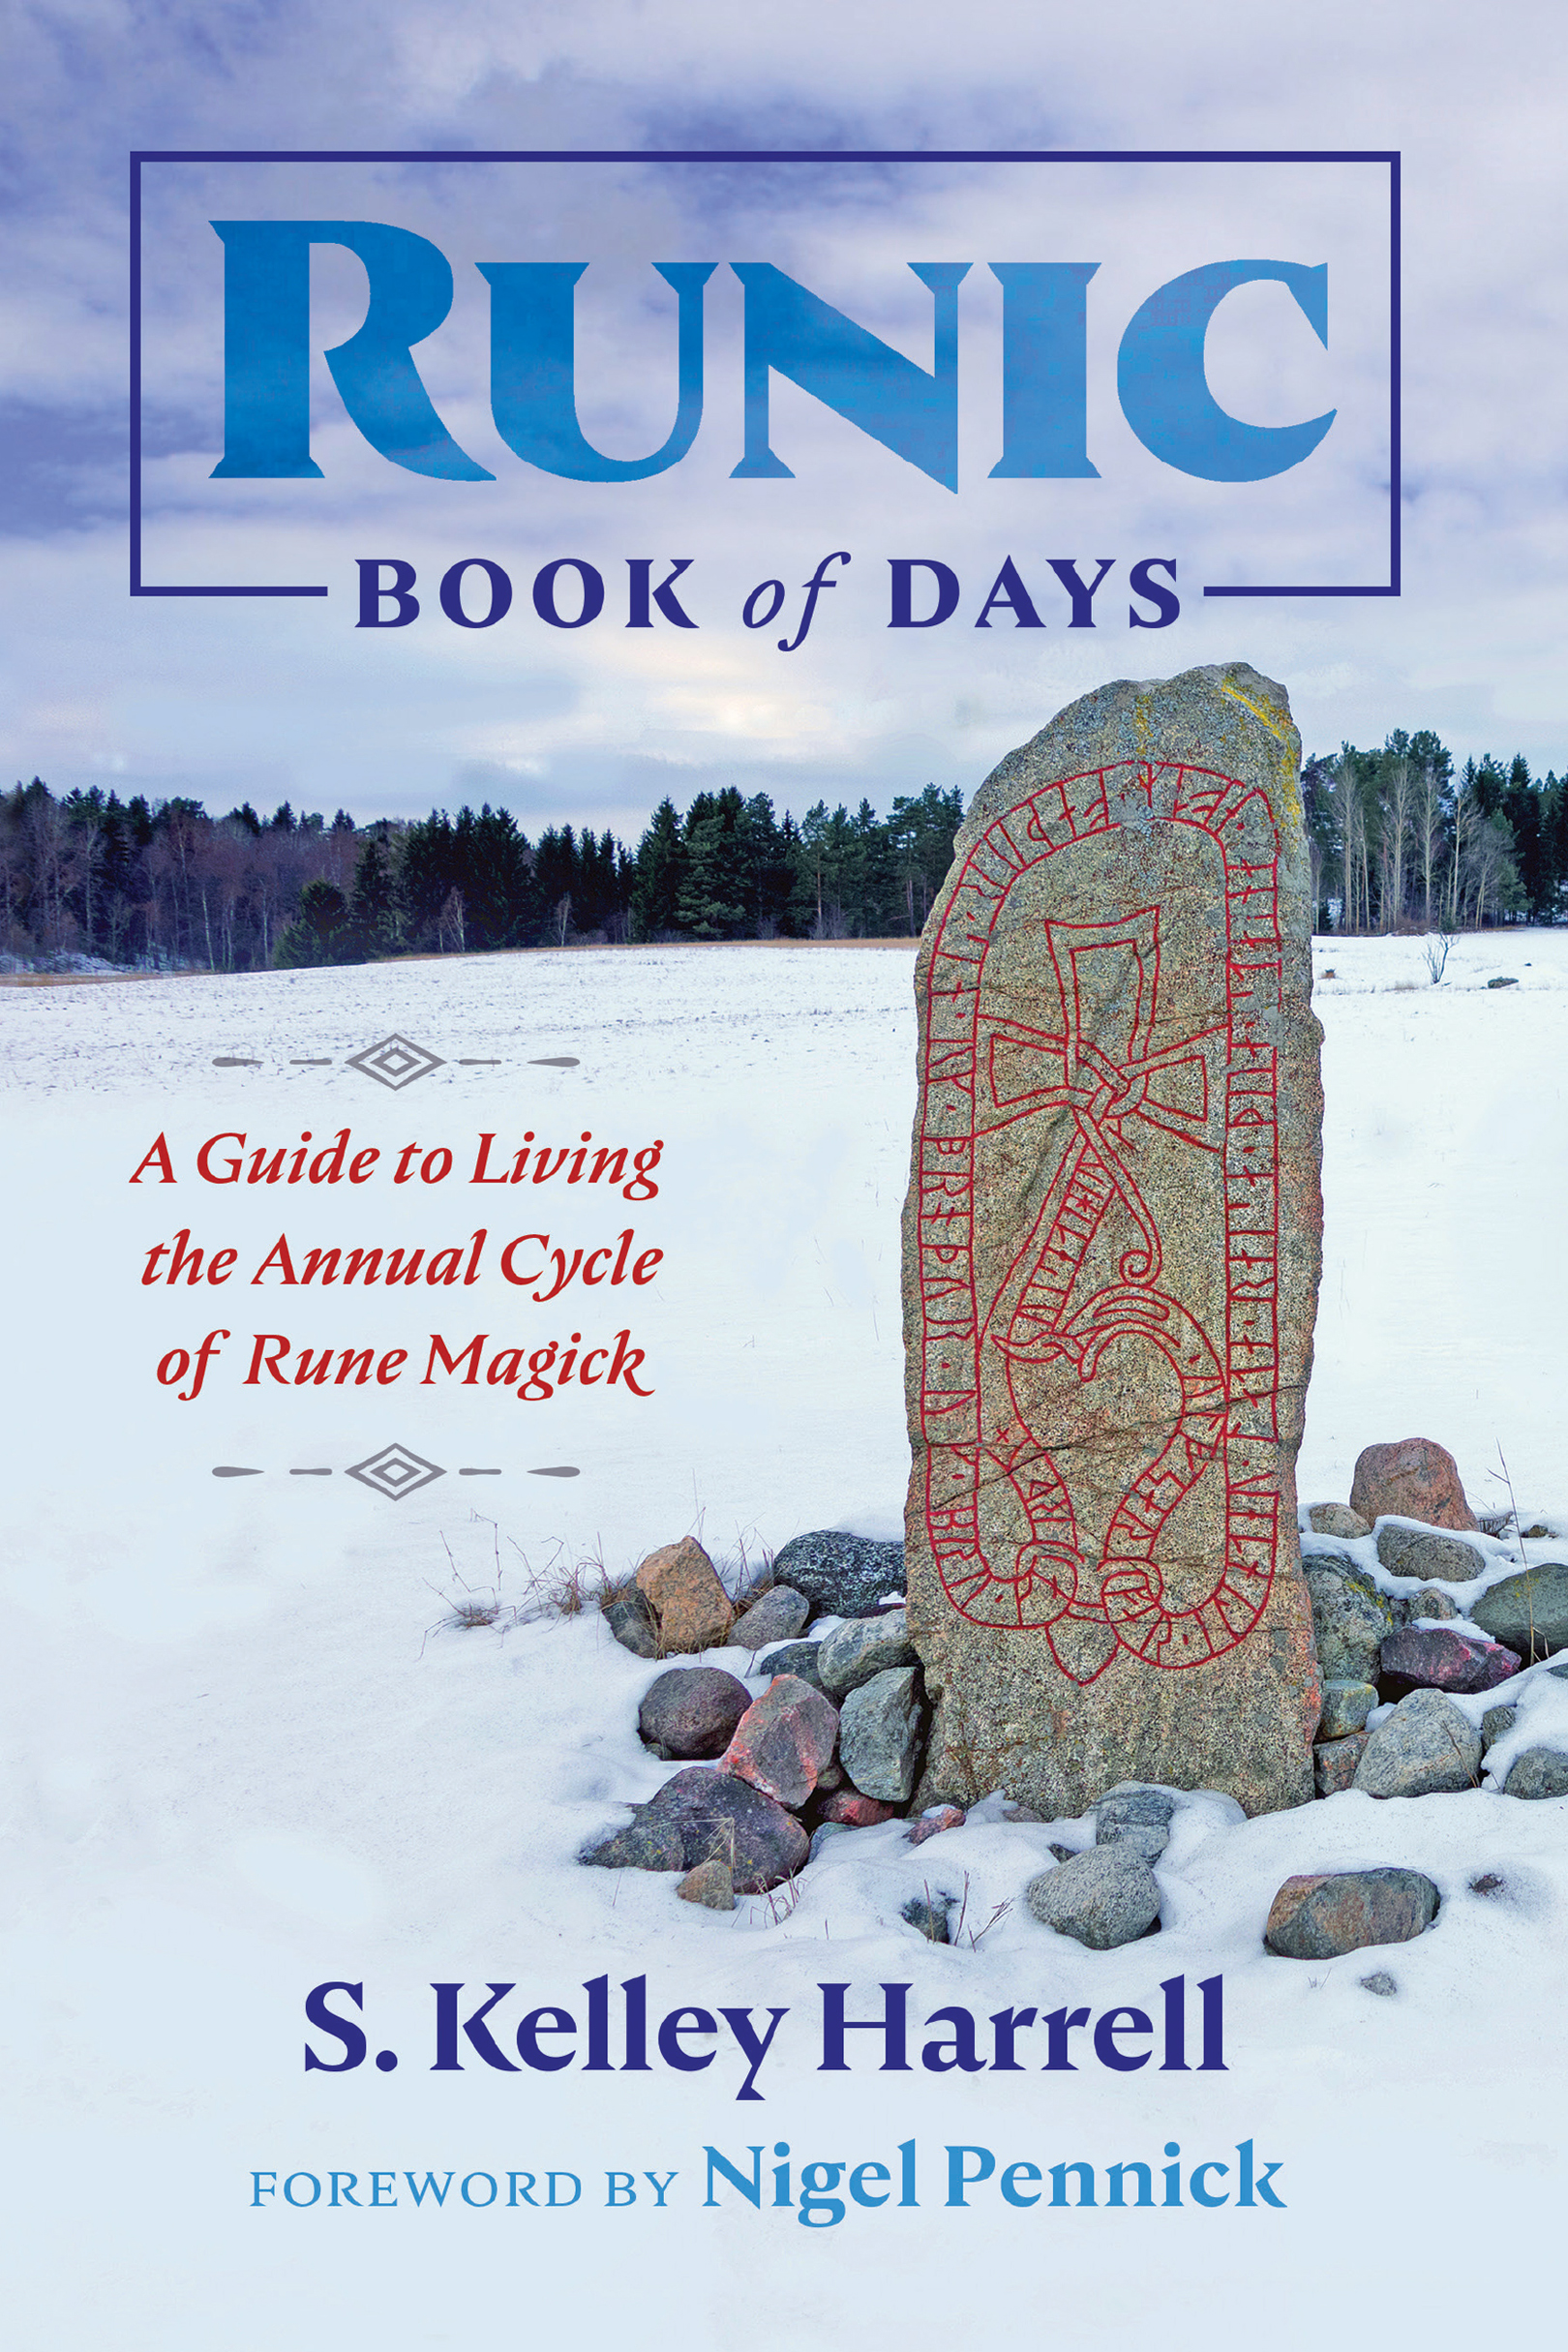 Runic Book of Days A Guide to Living the Annual Cycle of Rune Magick - image 1